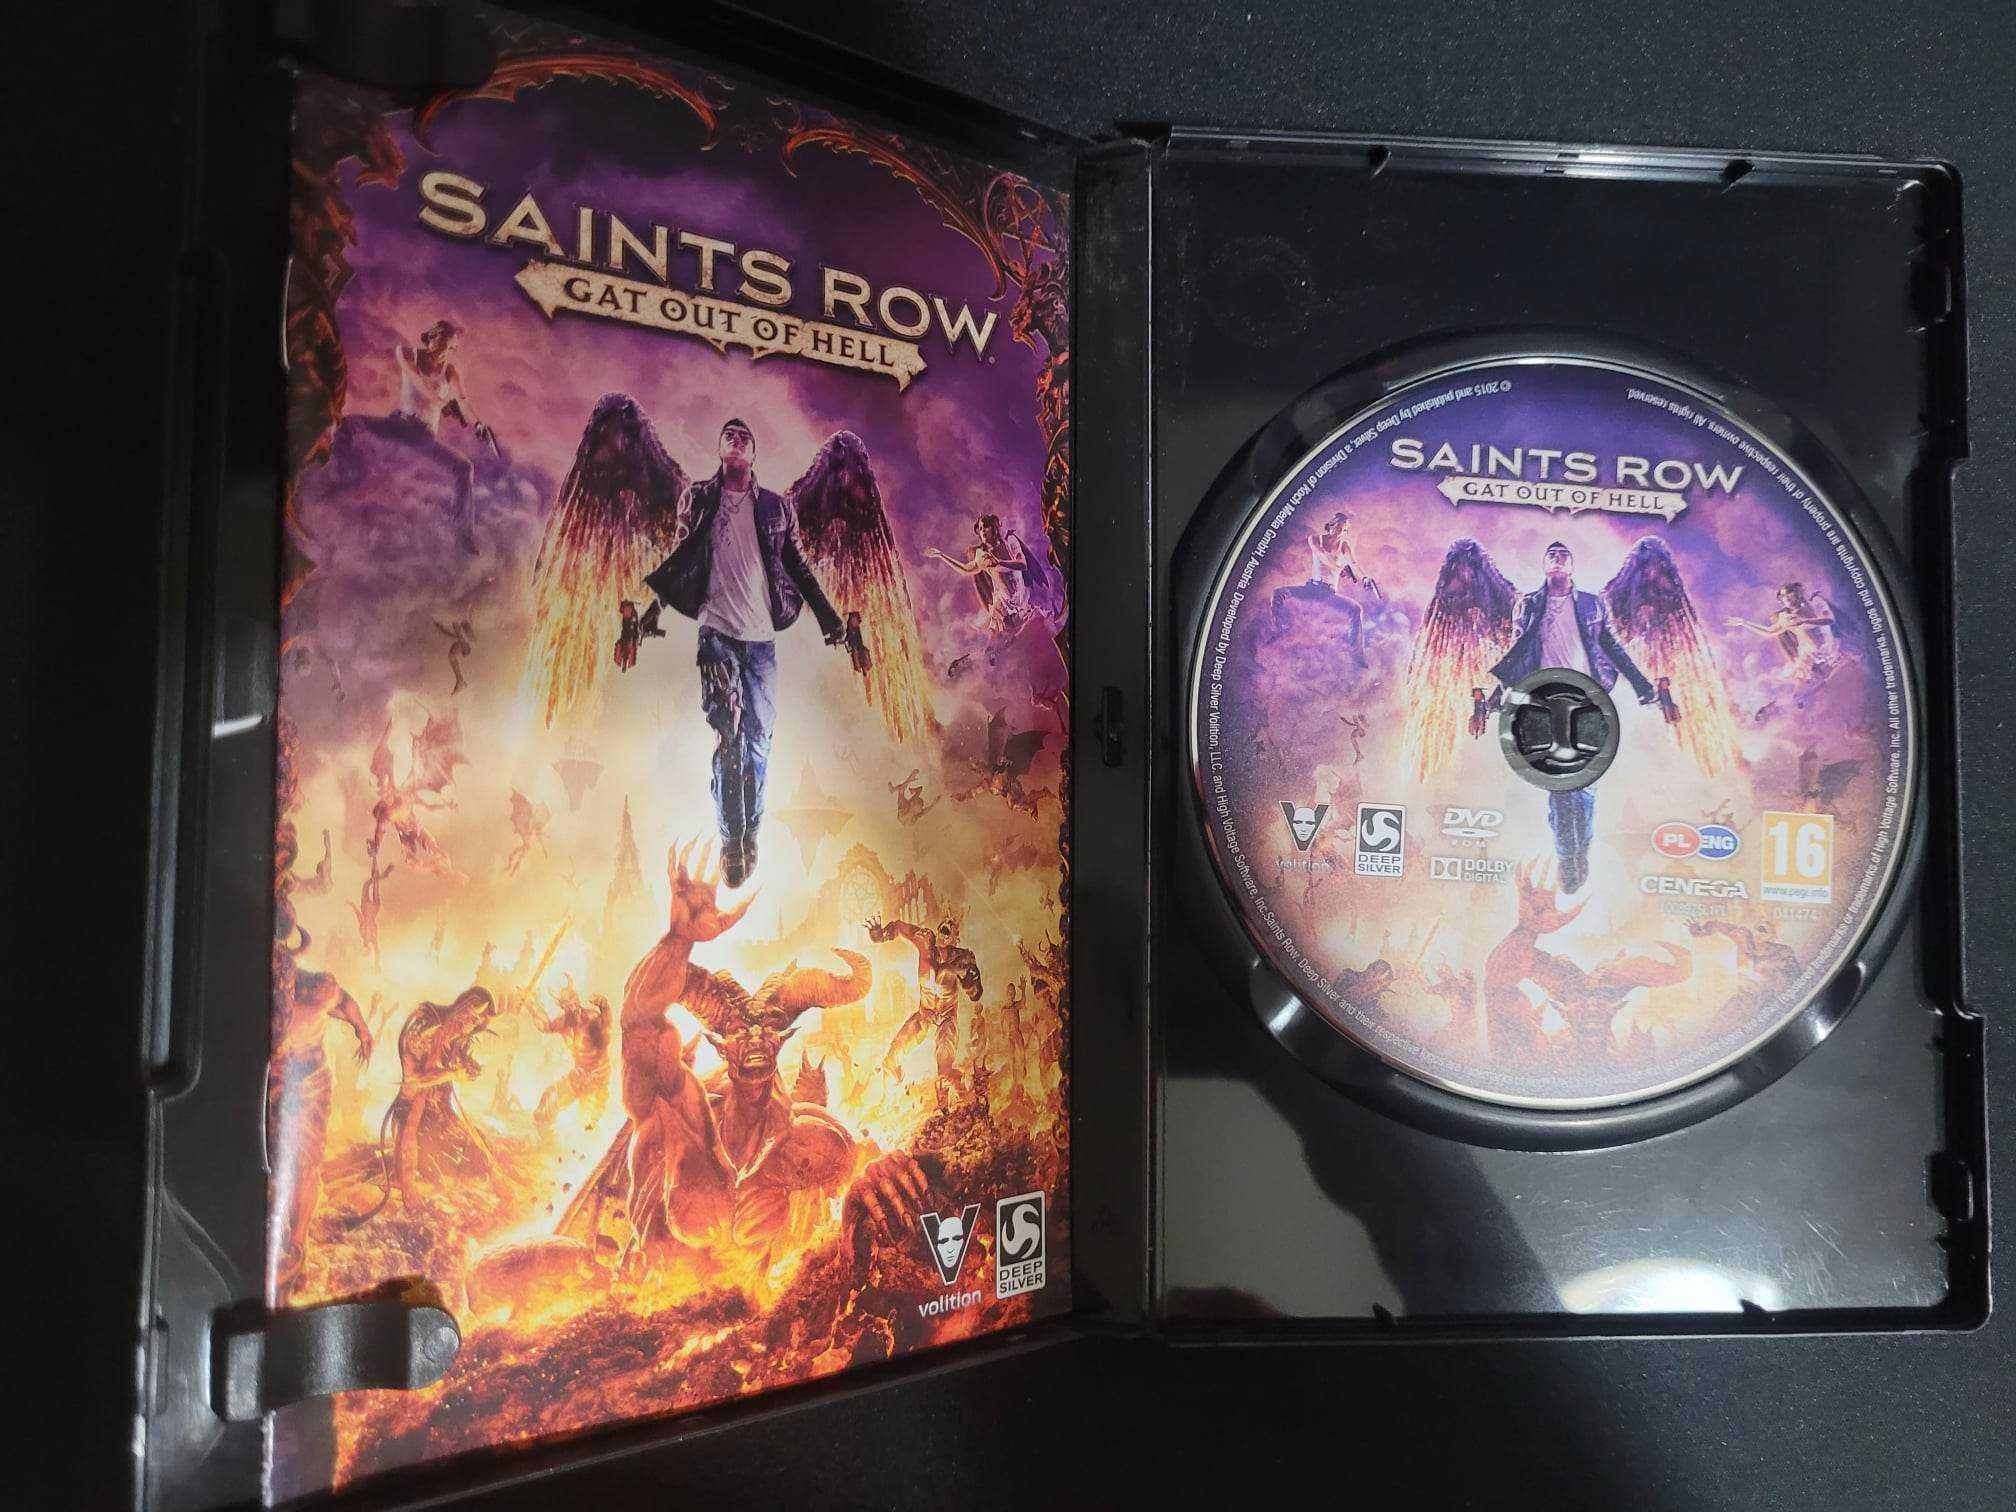 Saints Row gat out of hell PC